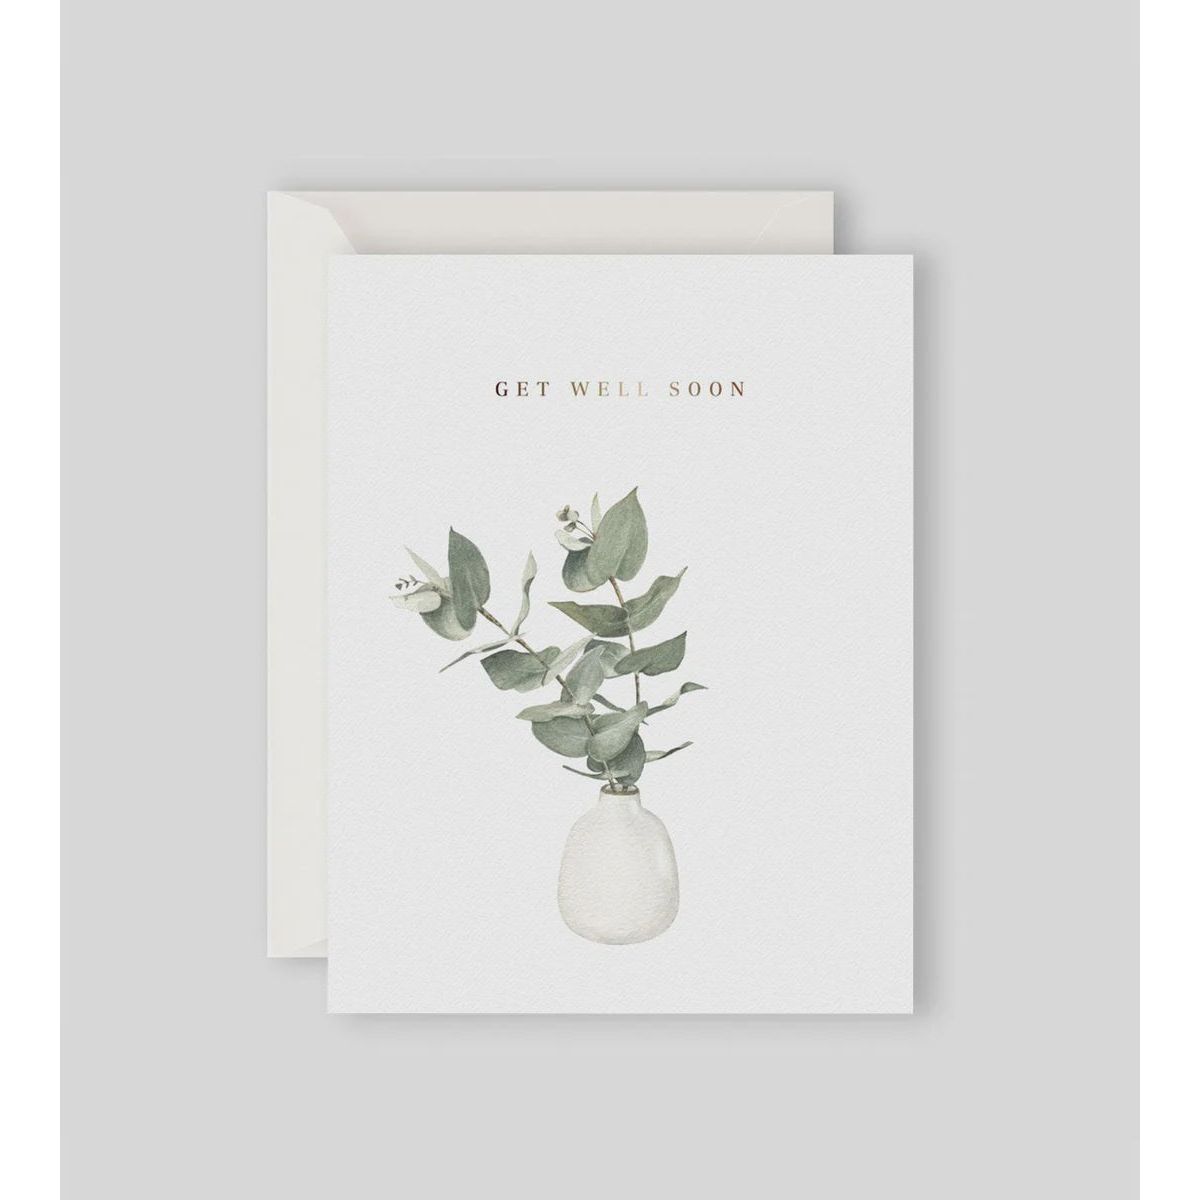 Father Rabbit Stationery - Eucalyptus Get Well Soon Card - Urban Naturals